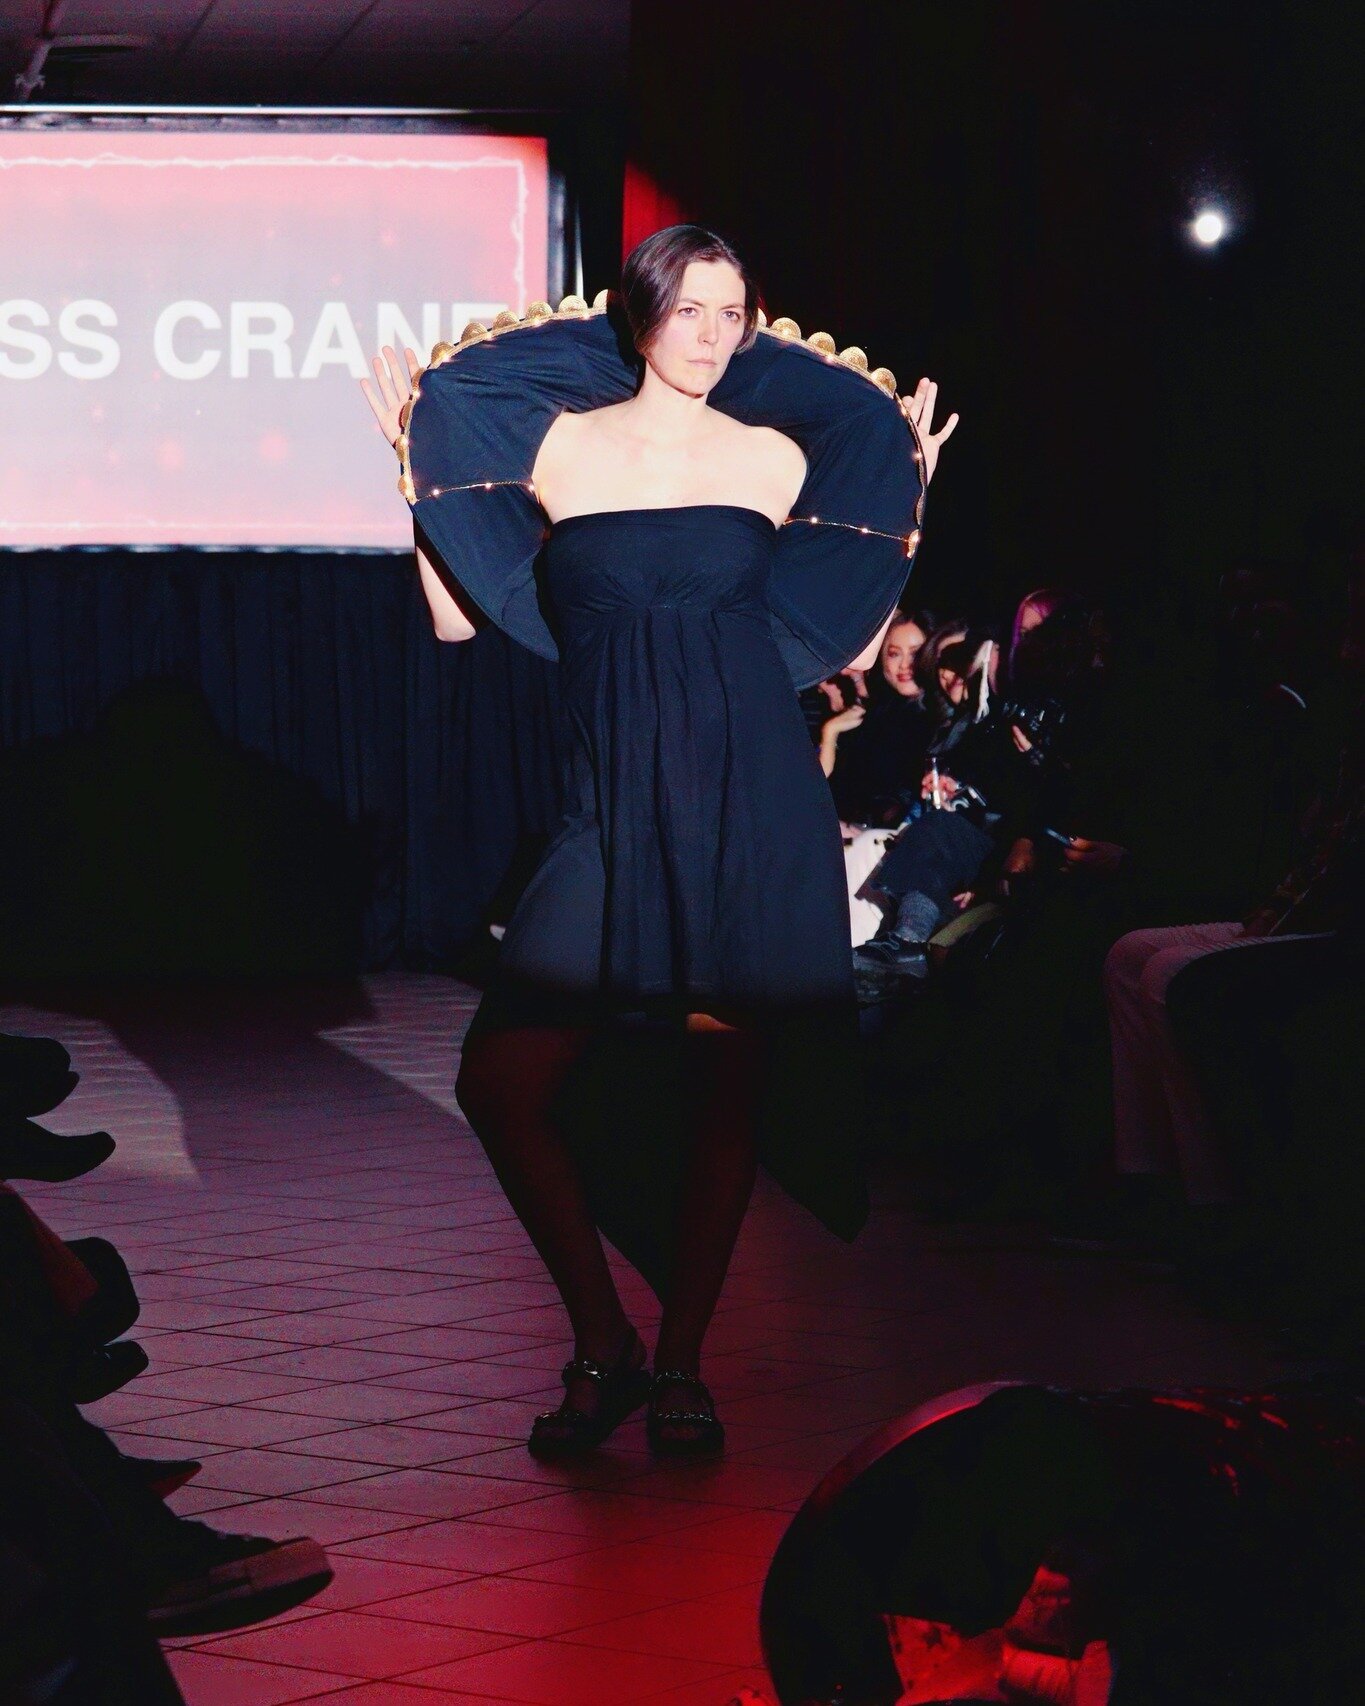 Transformative Fashion: My Journey with ShadowBall Fashion Show. Discover the fusion of fashion, mental health, and environmental consciousness in my latest blog post. Read more: https://jesscrane.com/blog/shadowball2024 [or Link in Bio]

Photo by Na